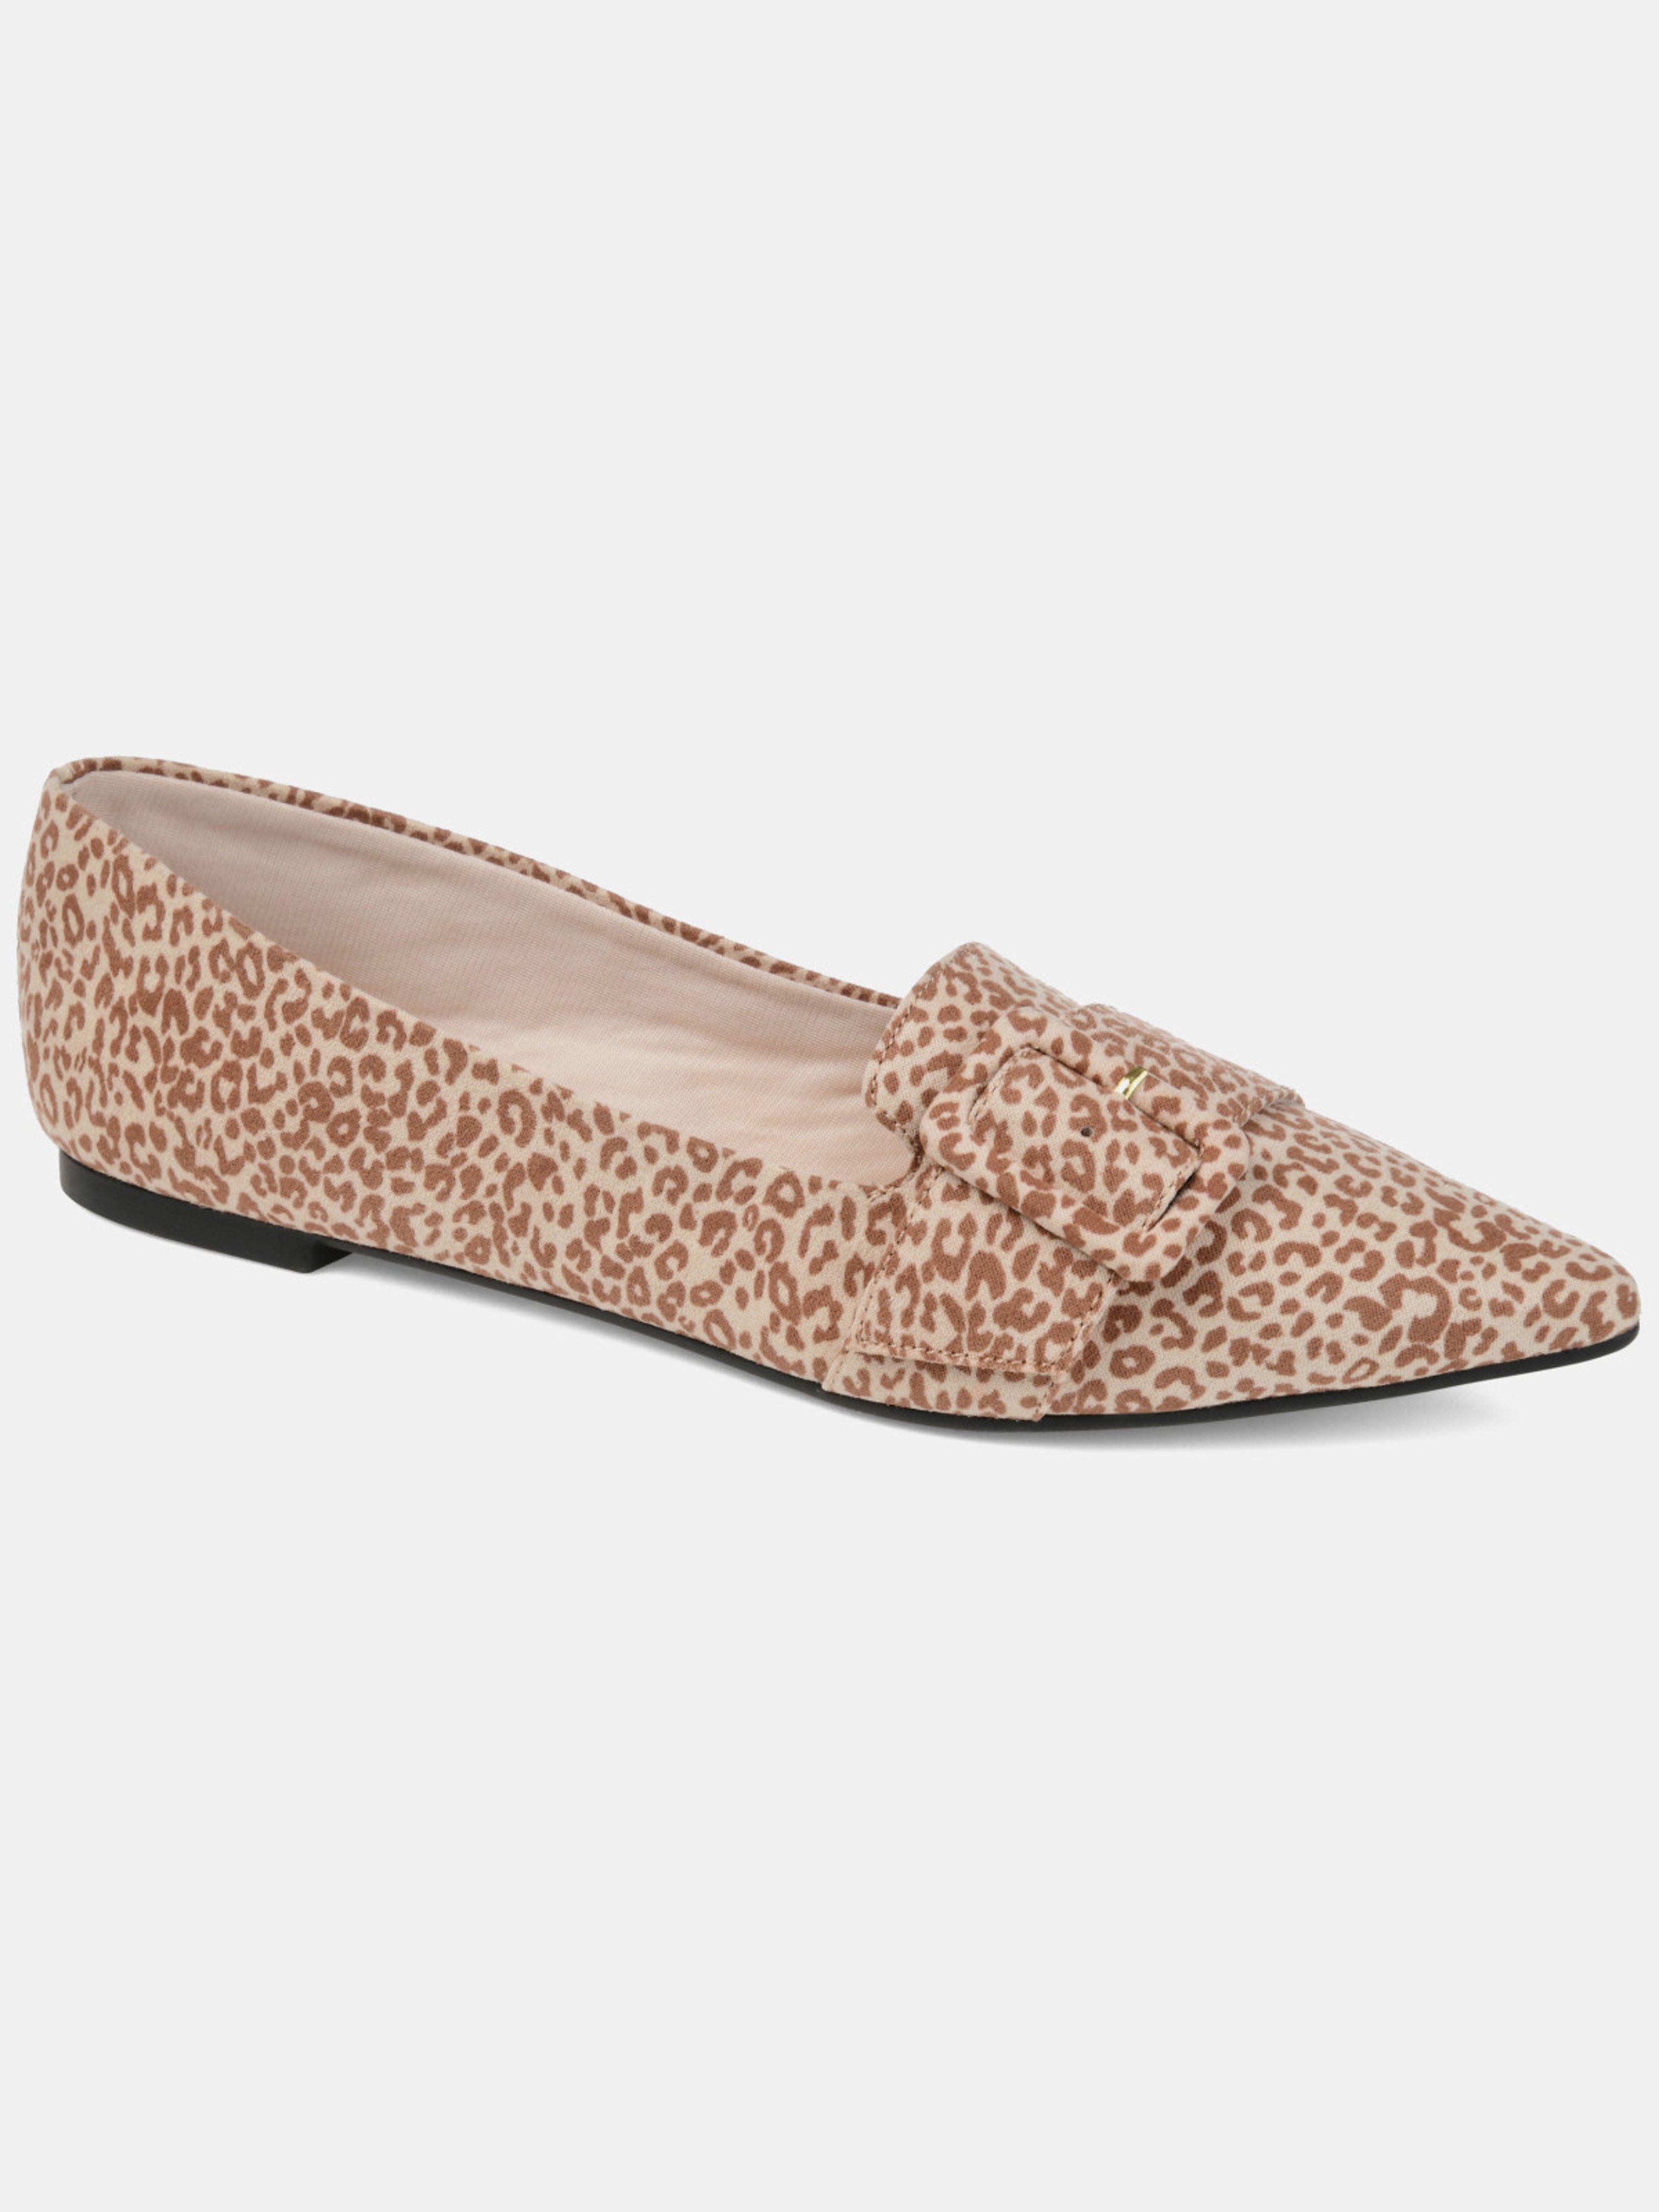 JOURNEE COLLECTION JOURNEE COLLECTION WOMEN'S AUDREY FLAT